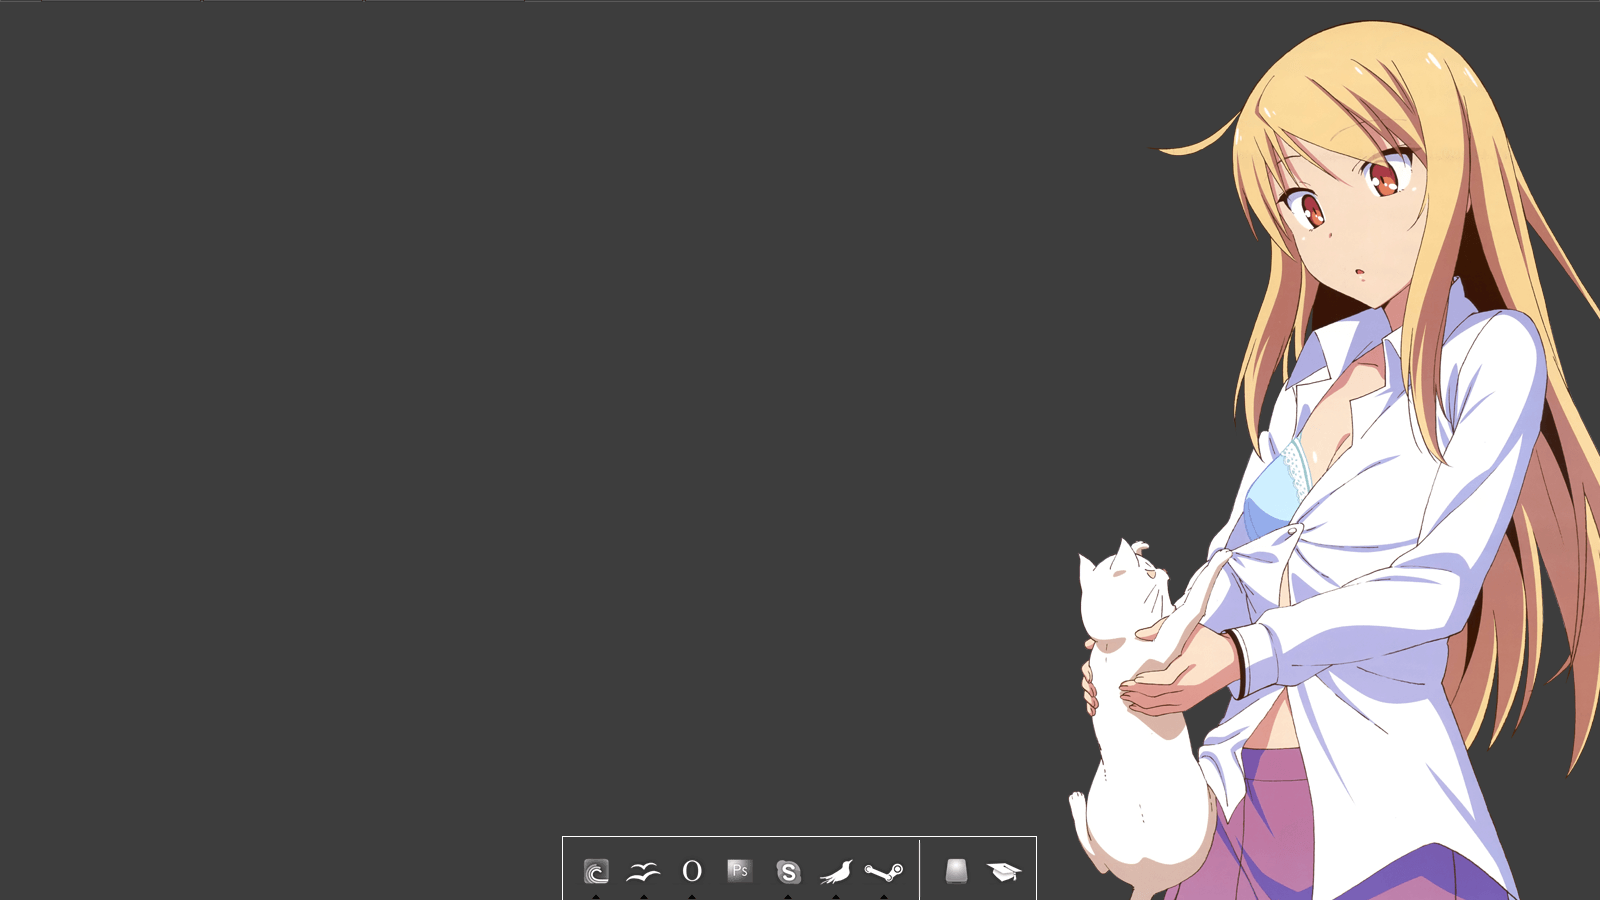 LEWD Anime Girl Ps4 Wallpapers - Wallpaper Cave. 